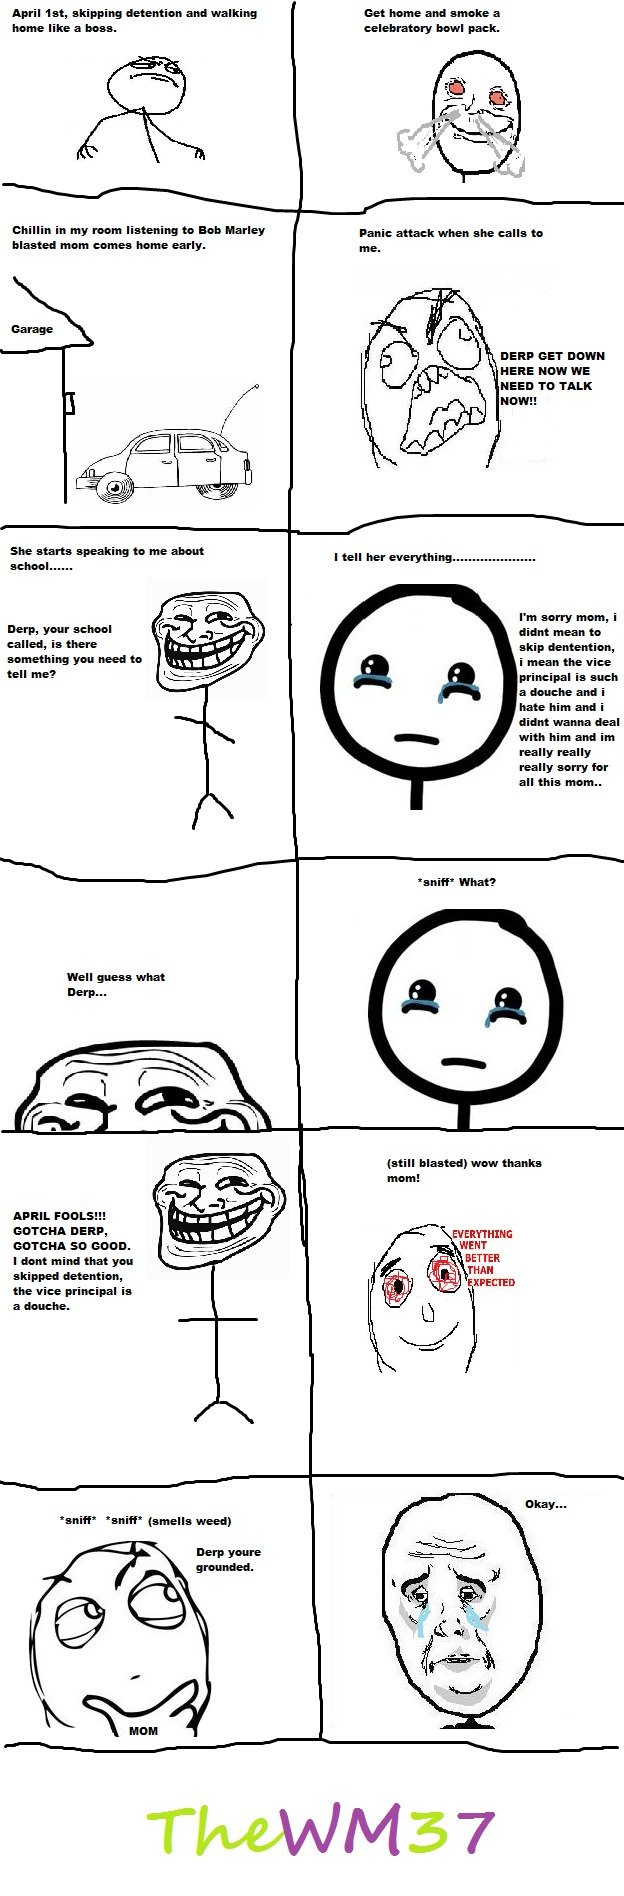 Troll Mom. ok dont hate on the paint. but this was happened to me with my mom and I a few years back, i just remembered it so i decided to share it with you FJ.